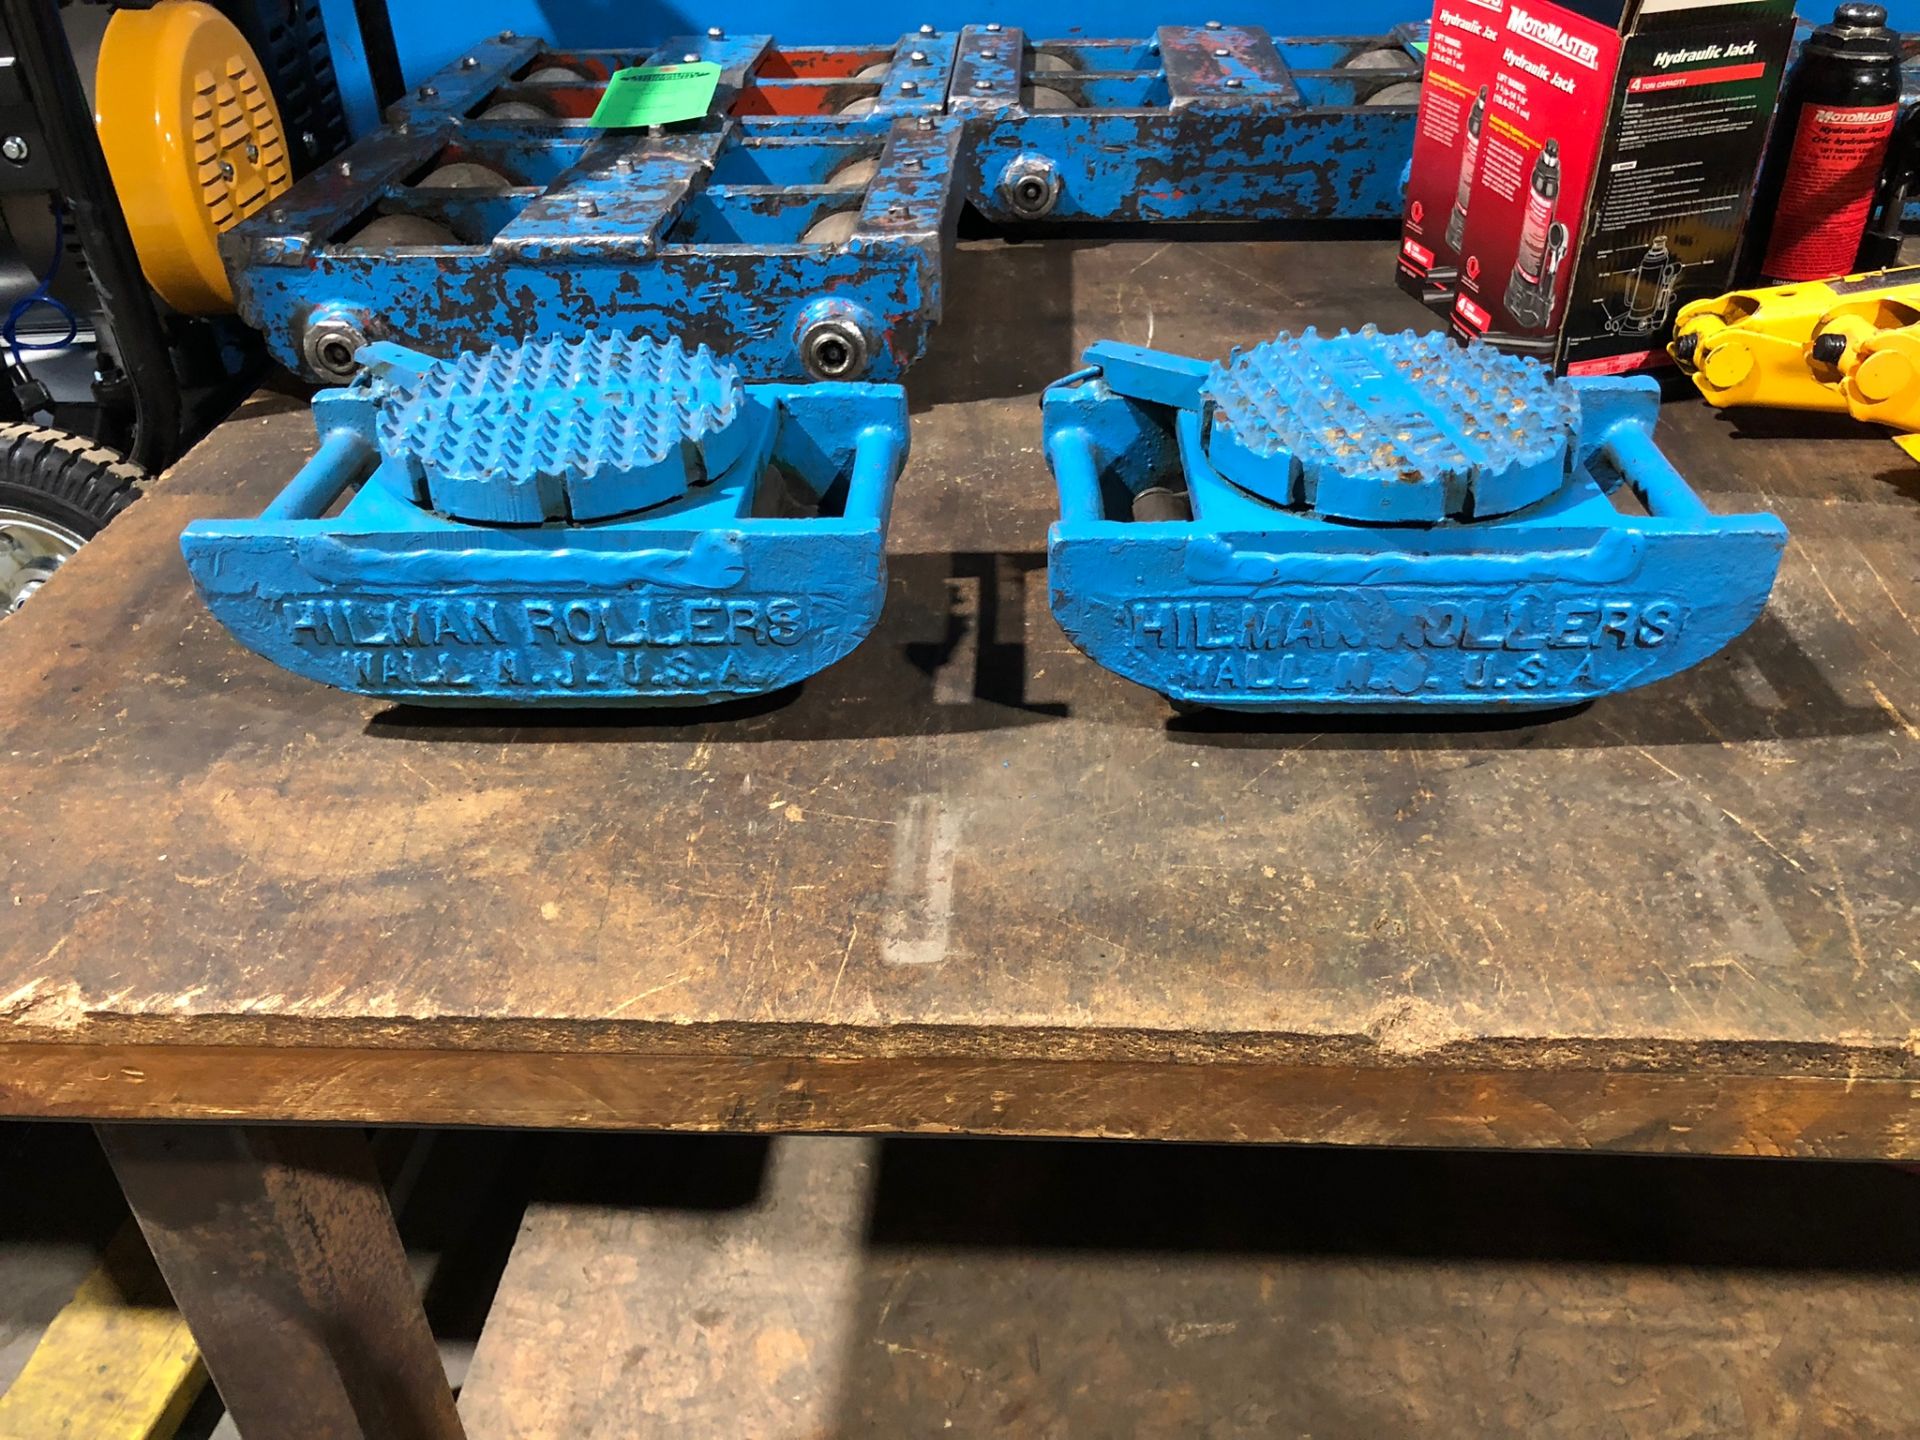 Lot of 2 (2 units) Hilman Rollers 15 Ton total (7.5T each)